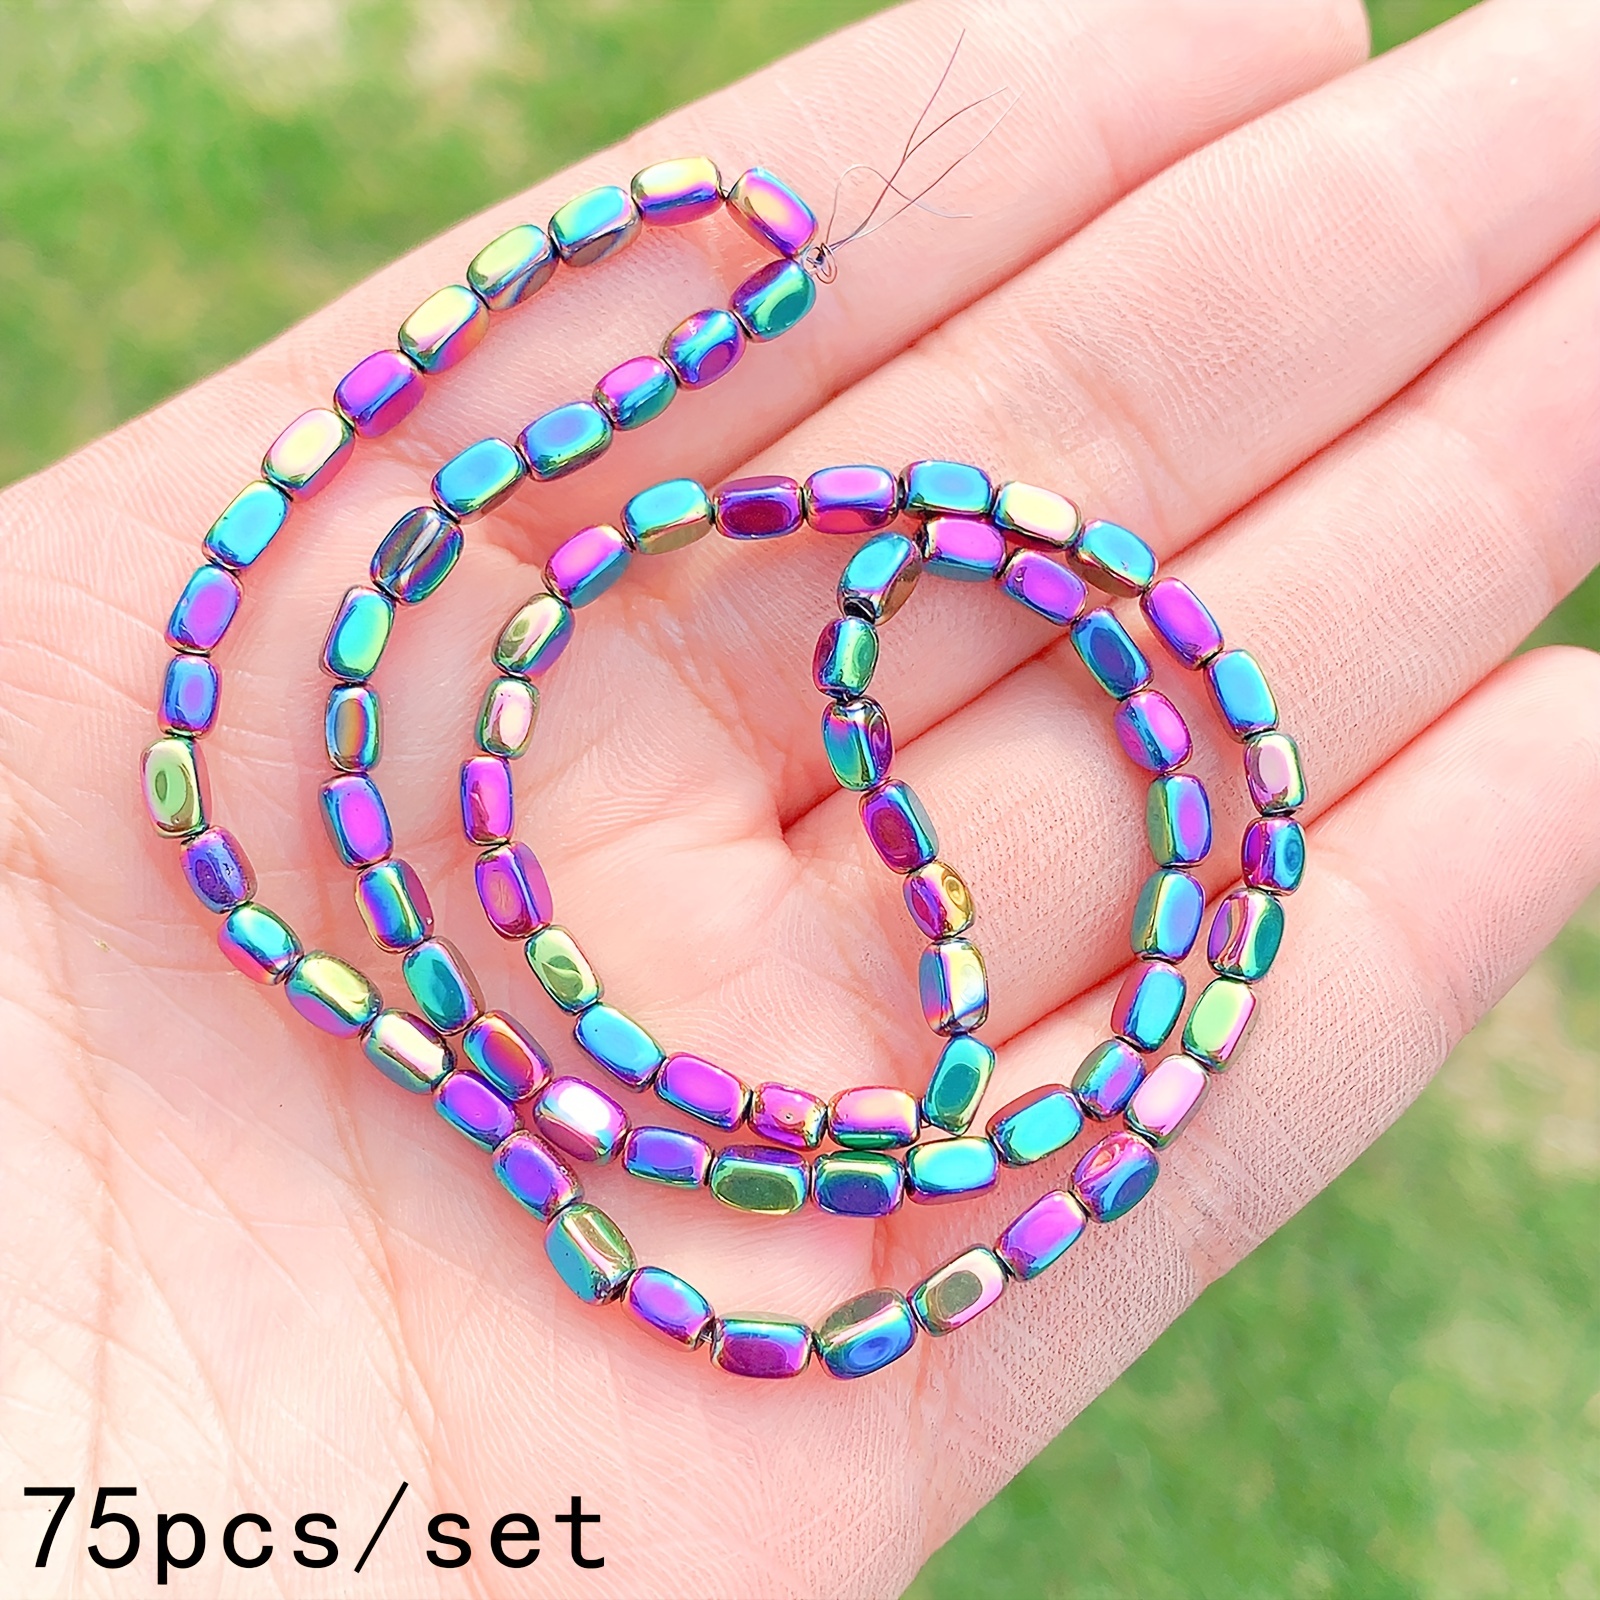 Cheap 4mm Glass Beads Loose Spacer Flat bead AB Color Fahion DIY Jewelry  Accessories Bracelet Necklace Making